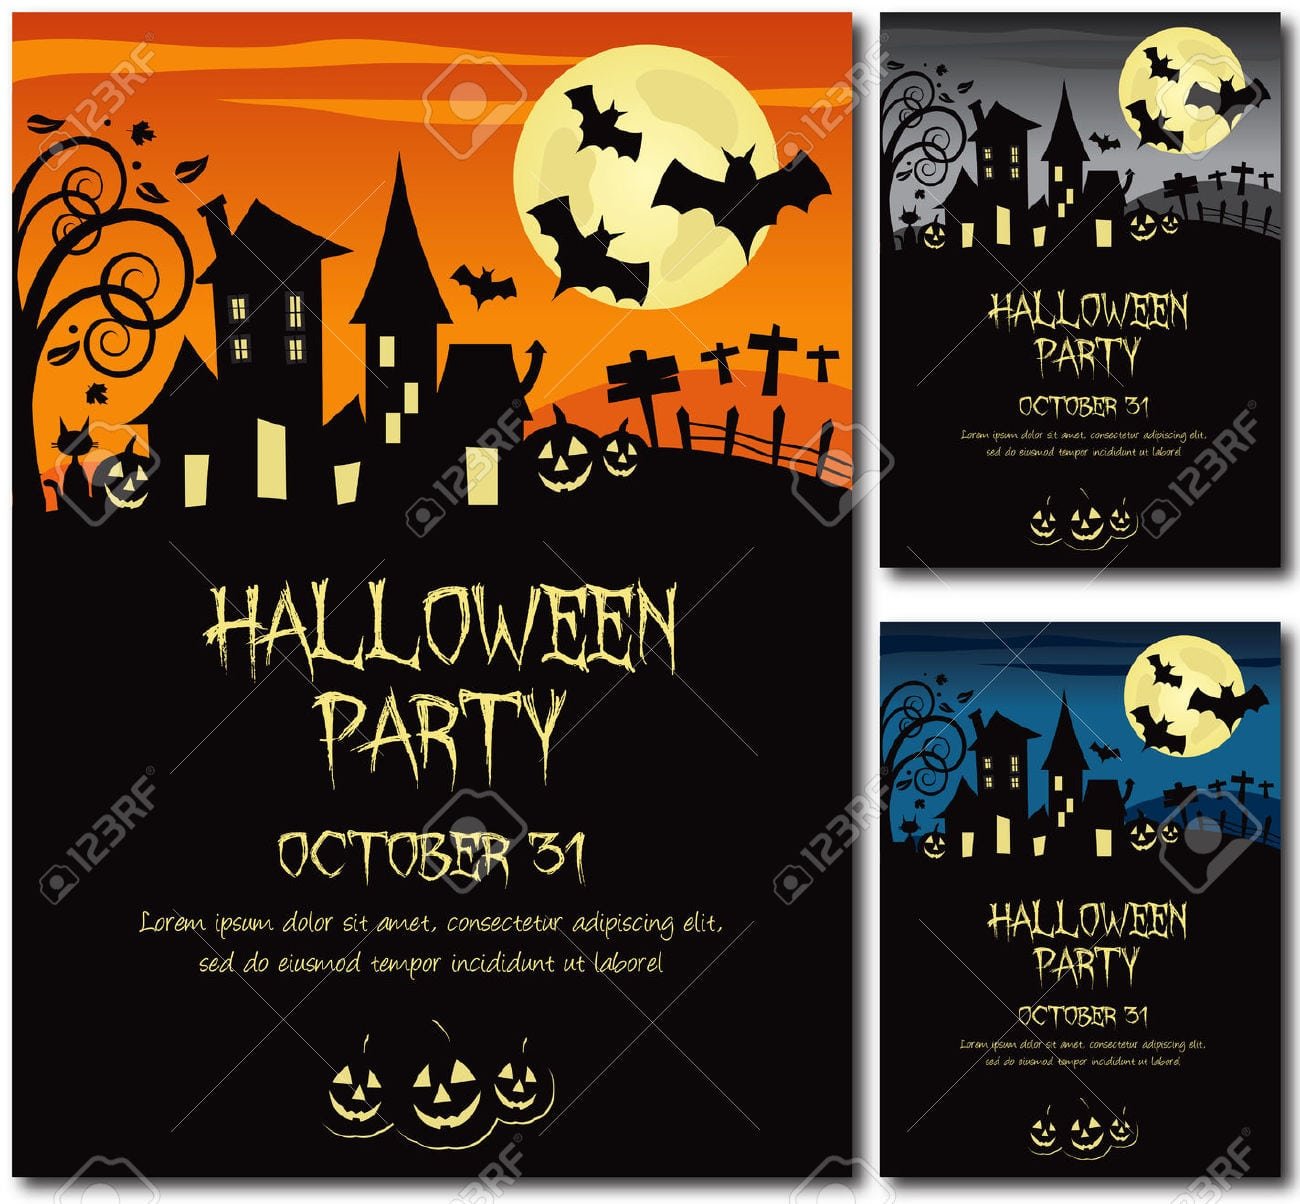 Halloween Party Invitation Poster Or Card Illustration Design